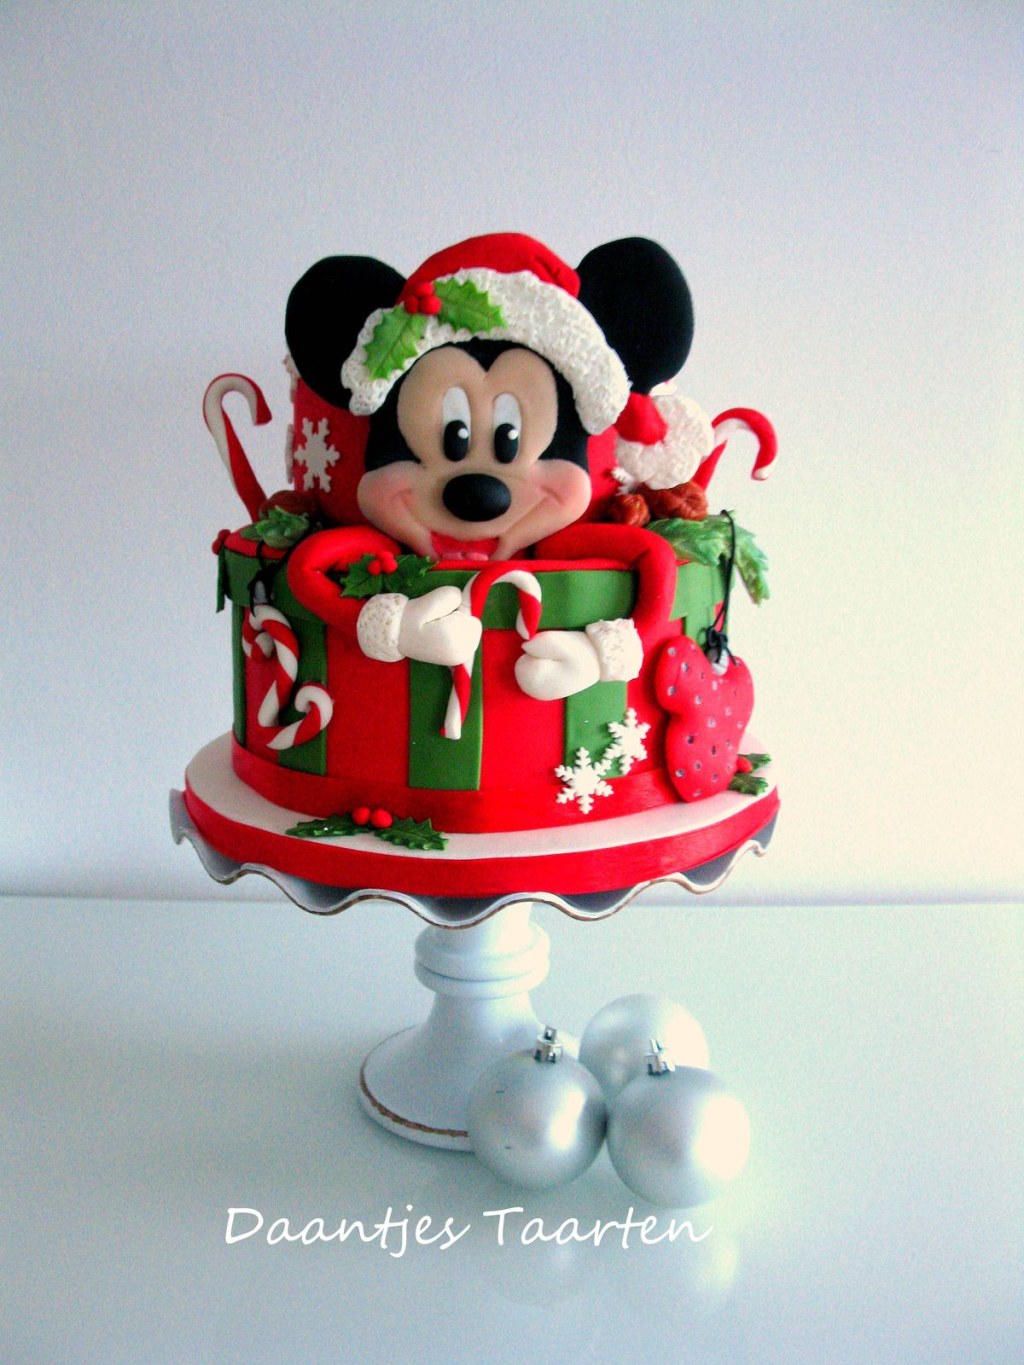 Picture of: Disney Christmas Cakes ideas  christmas cake, disney christmas